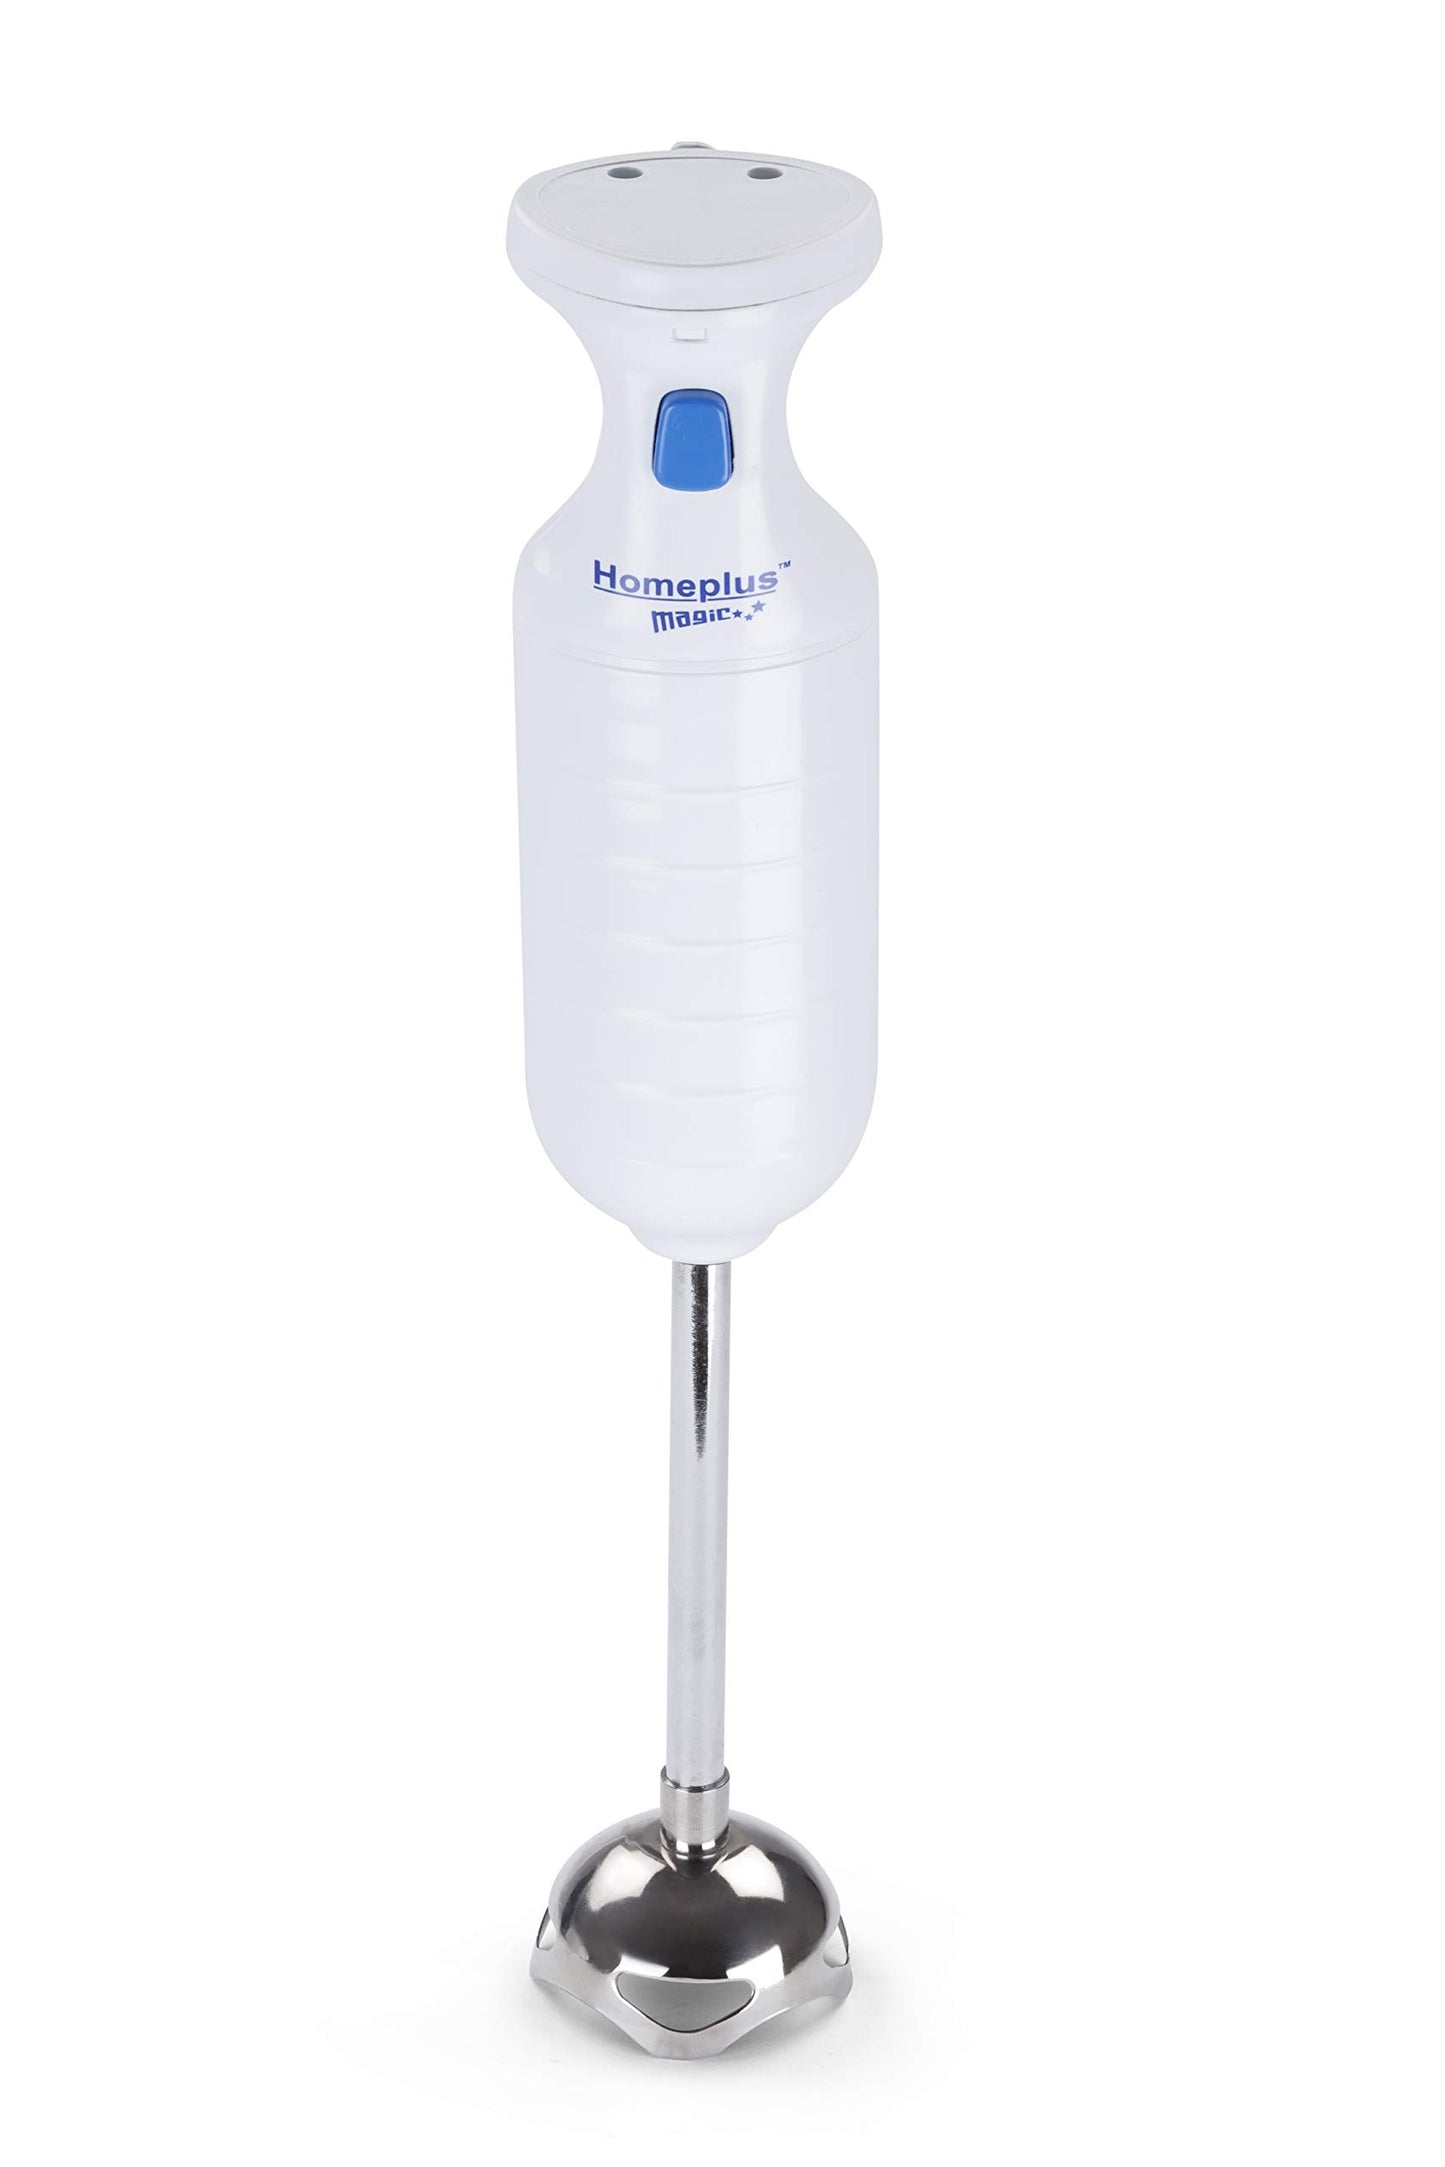 Home plus Turbo 300W Hand Blender (White) With Super Silent Multi-purpose Stainless Steel Blades